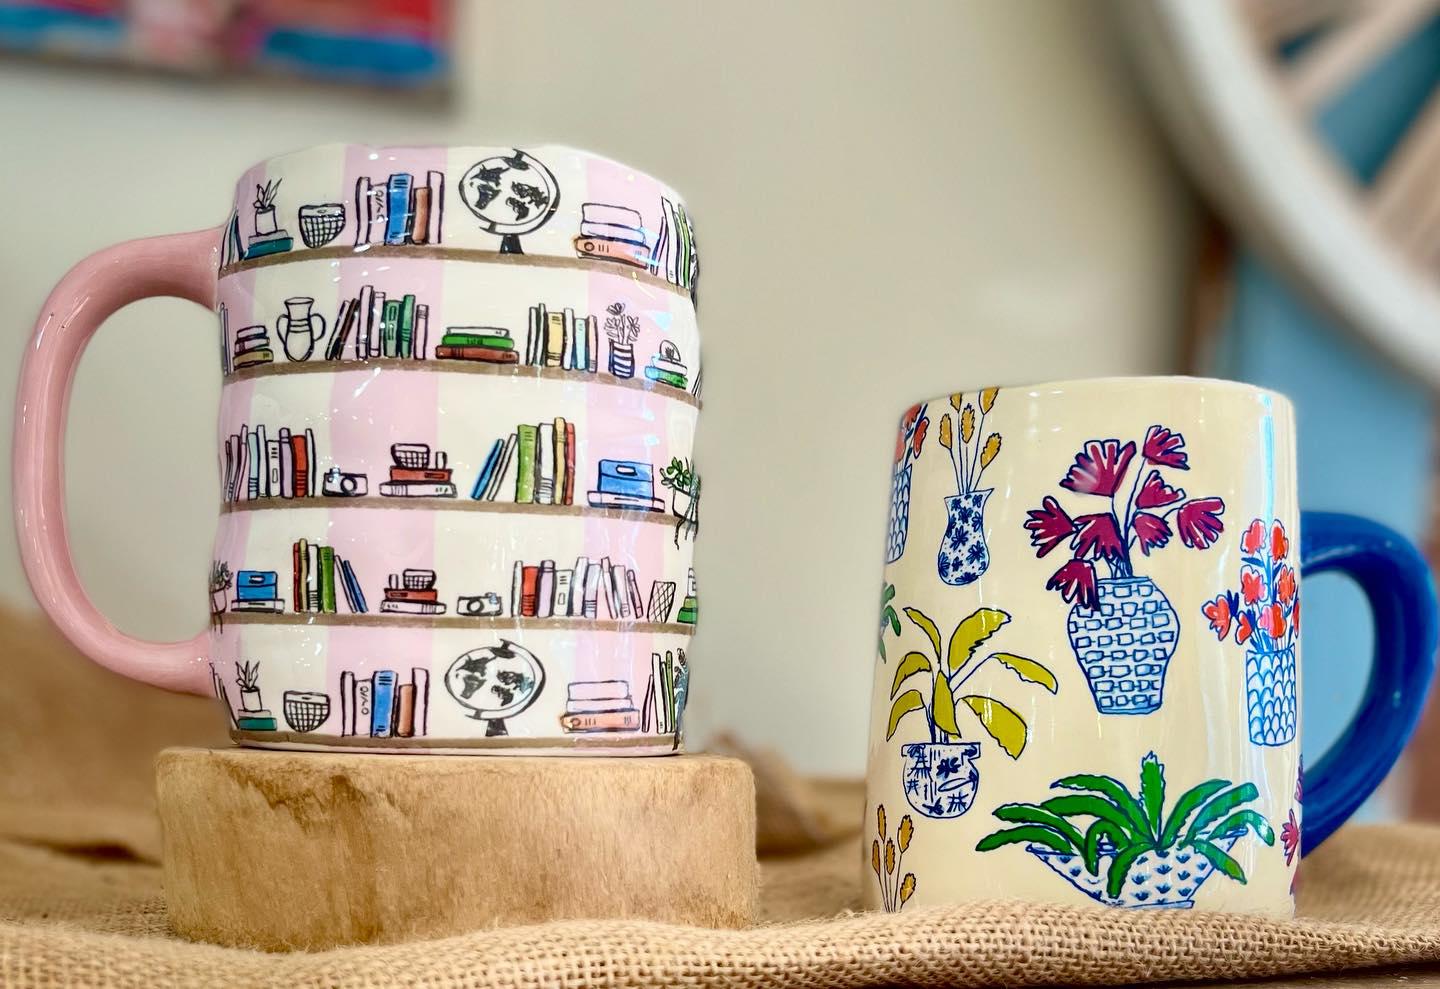 Are you a Sweet Grace fan? What about a fan of mugs? You’re in luck! We just got the cutest new Sweet Grace candles in, and just in time for Mother’s Day (it’s coming up faster than you think)! Make sure you check out these super cute candles before they’re gone! 🌸☕️💐💛